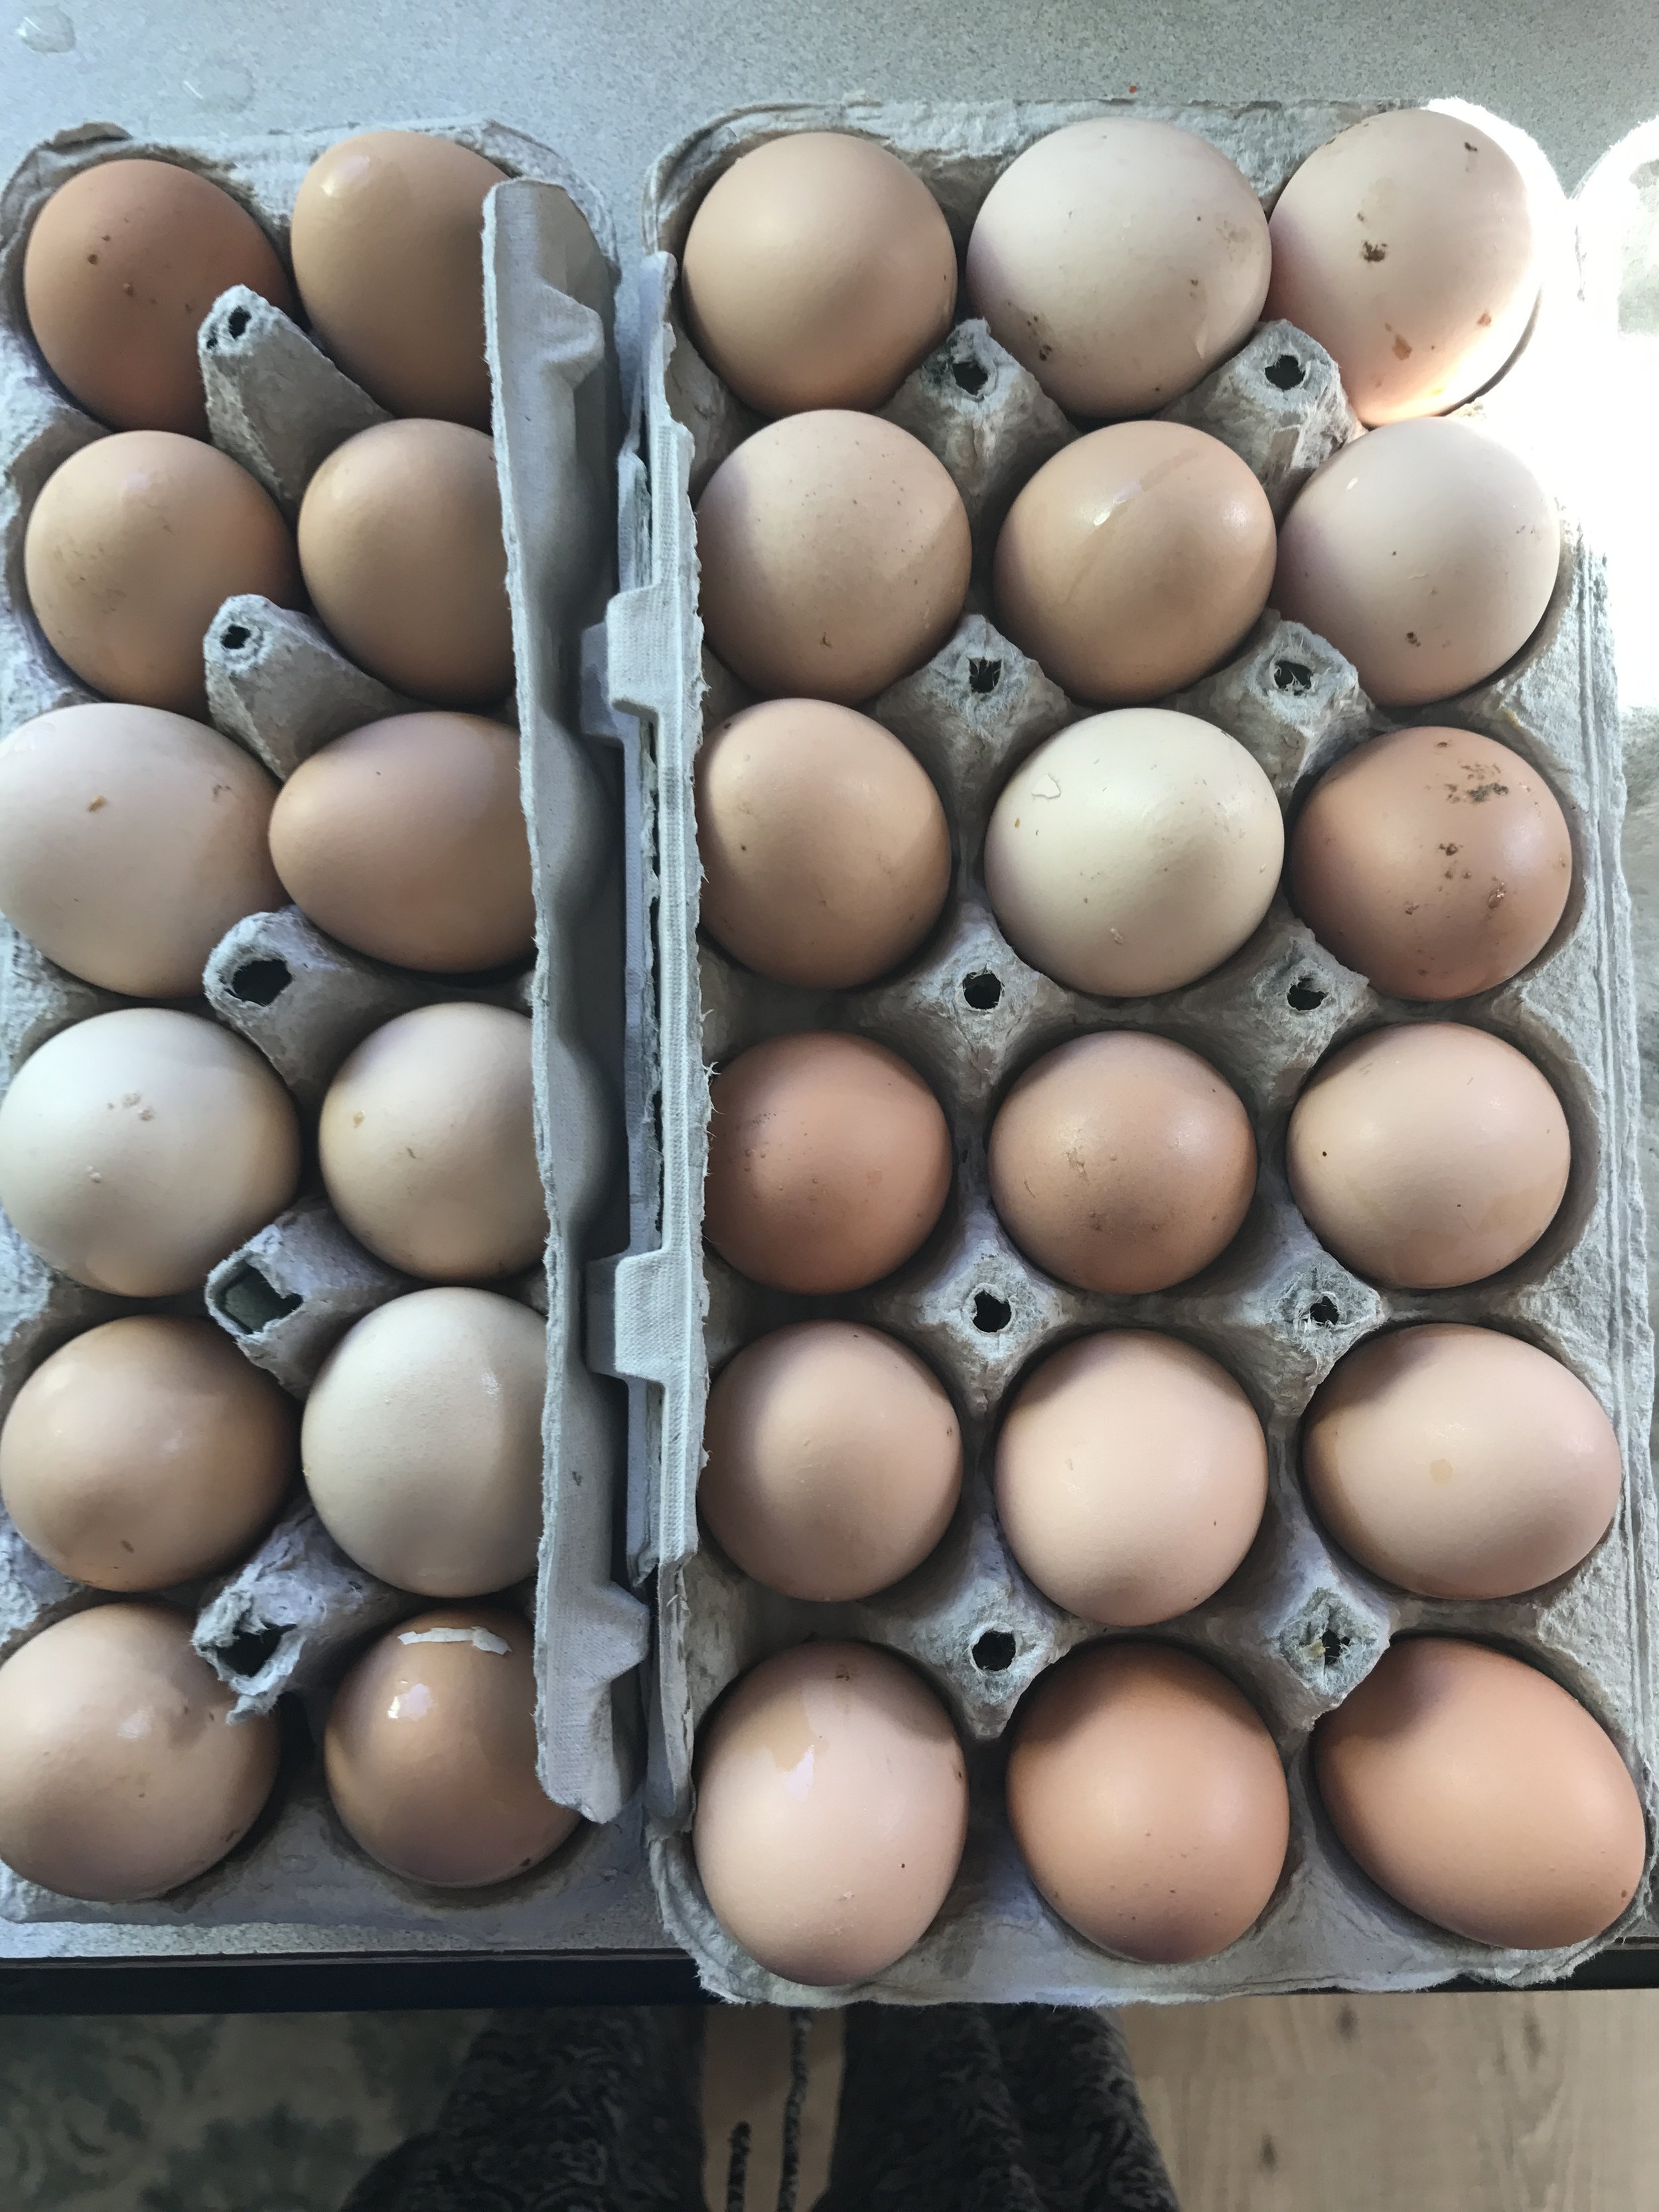 Eggs from the Sthealthy chickens